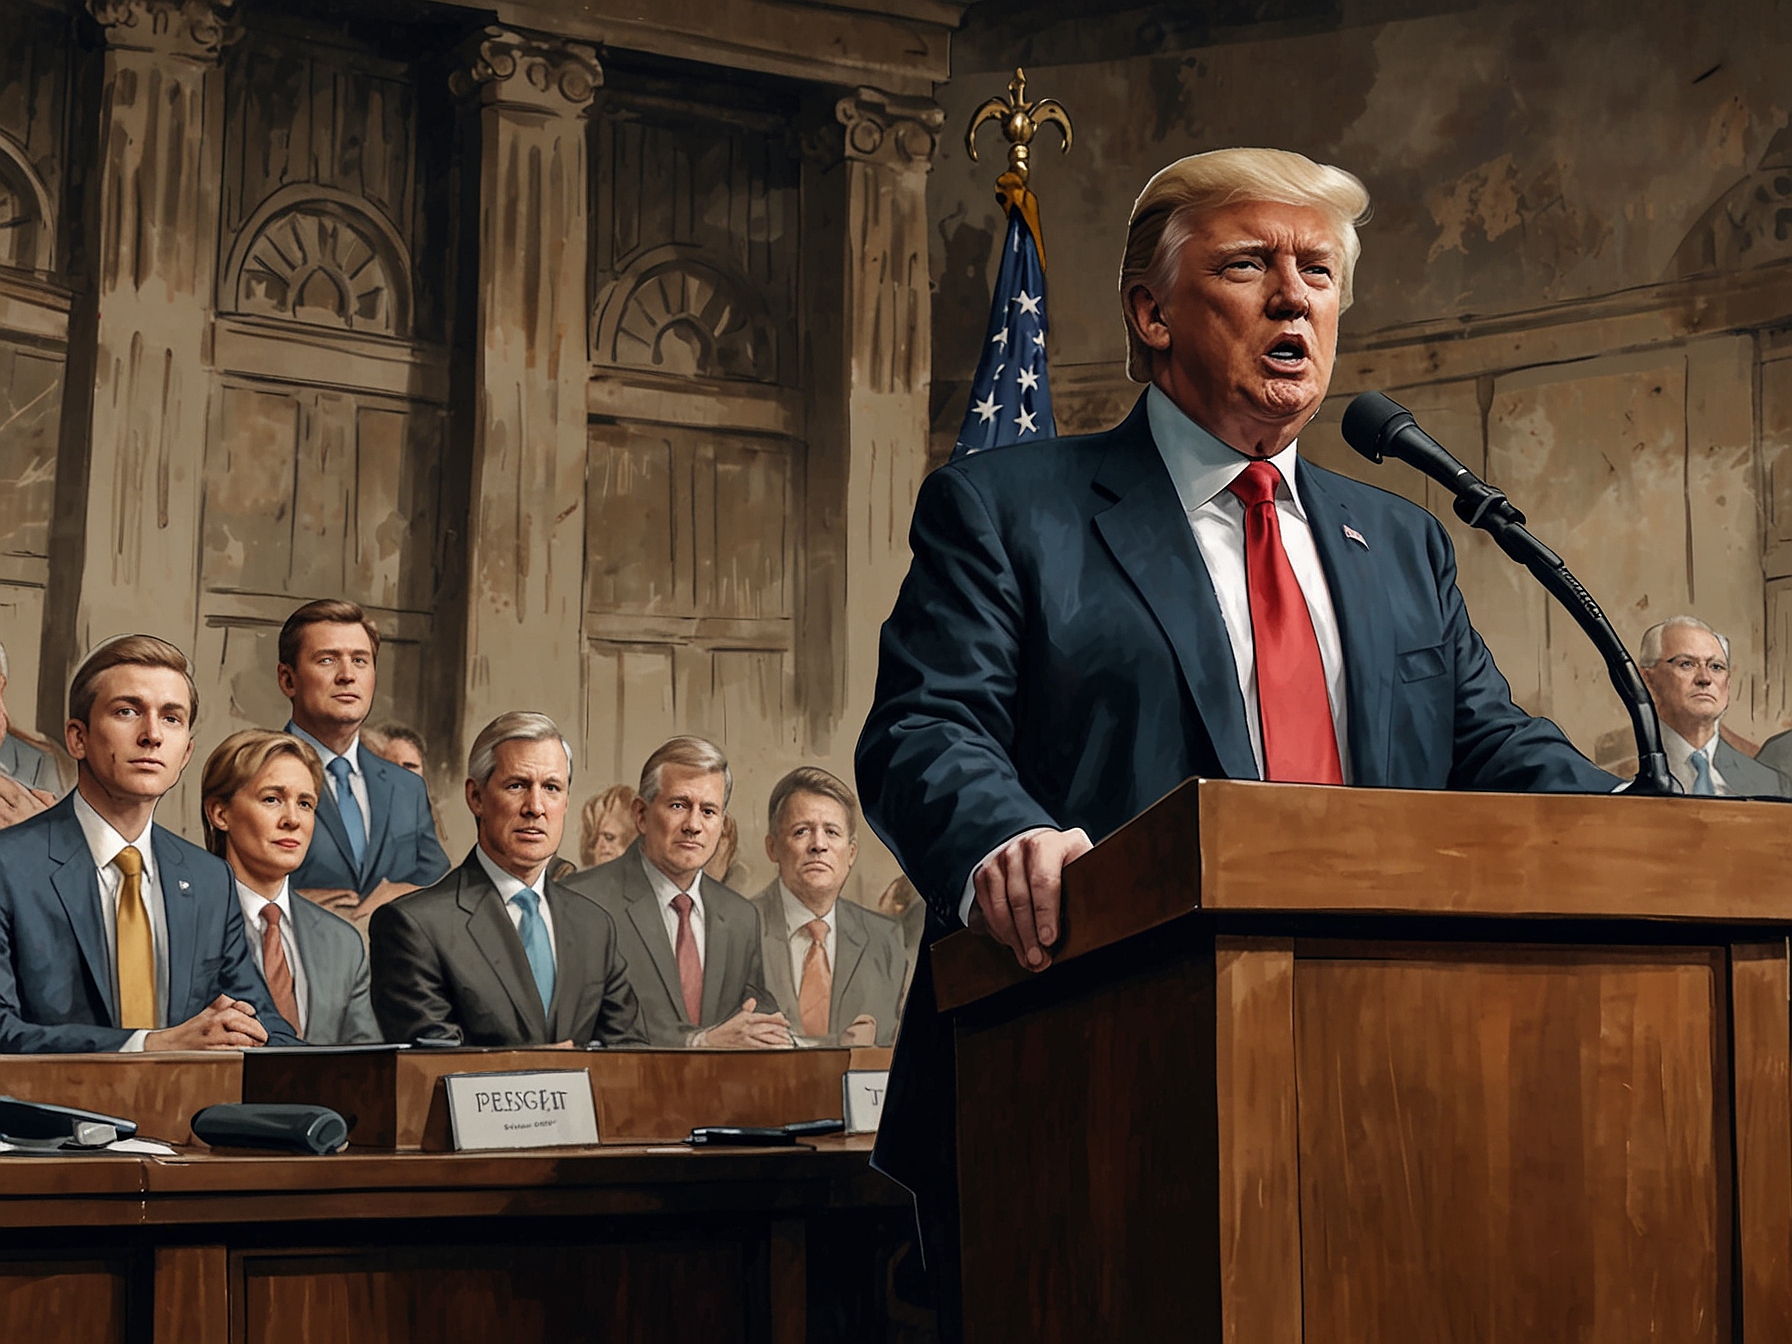 An image of President Trump speaking at a podium during a debate, passionately addressing economic recovery plans and emphasizing job creation efforts amidst the COVID-19 pandemic.